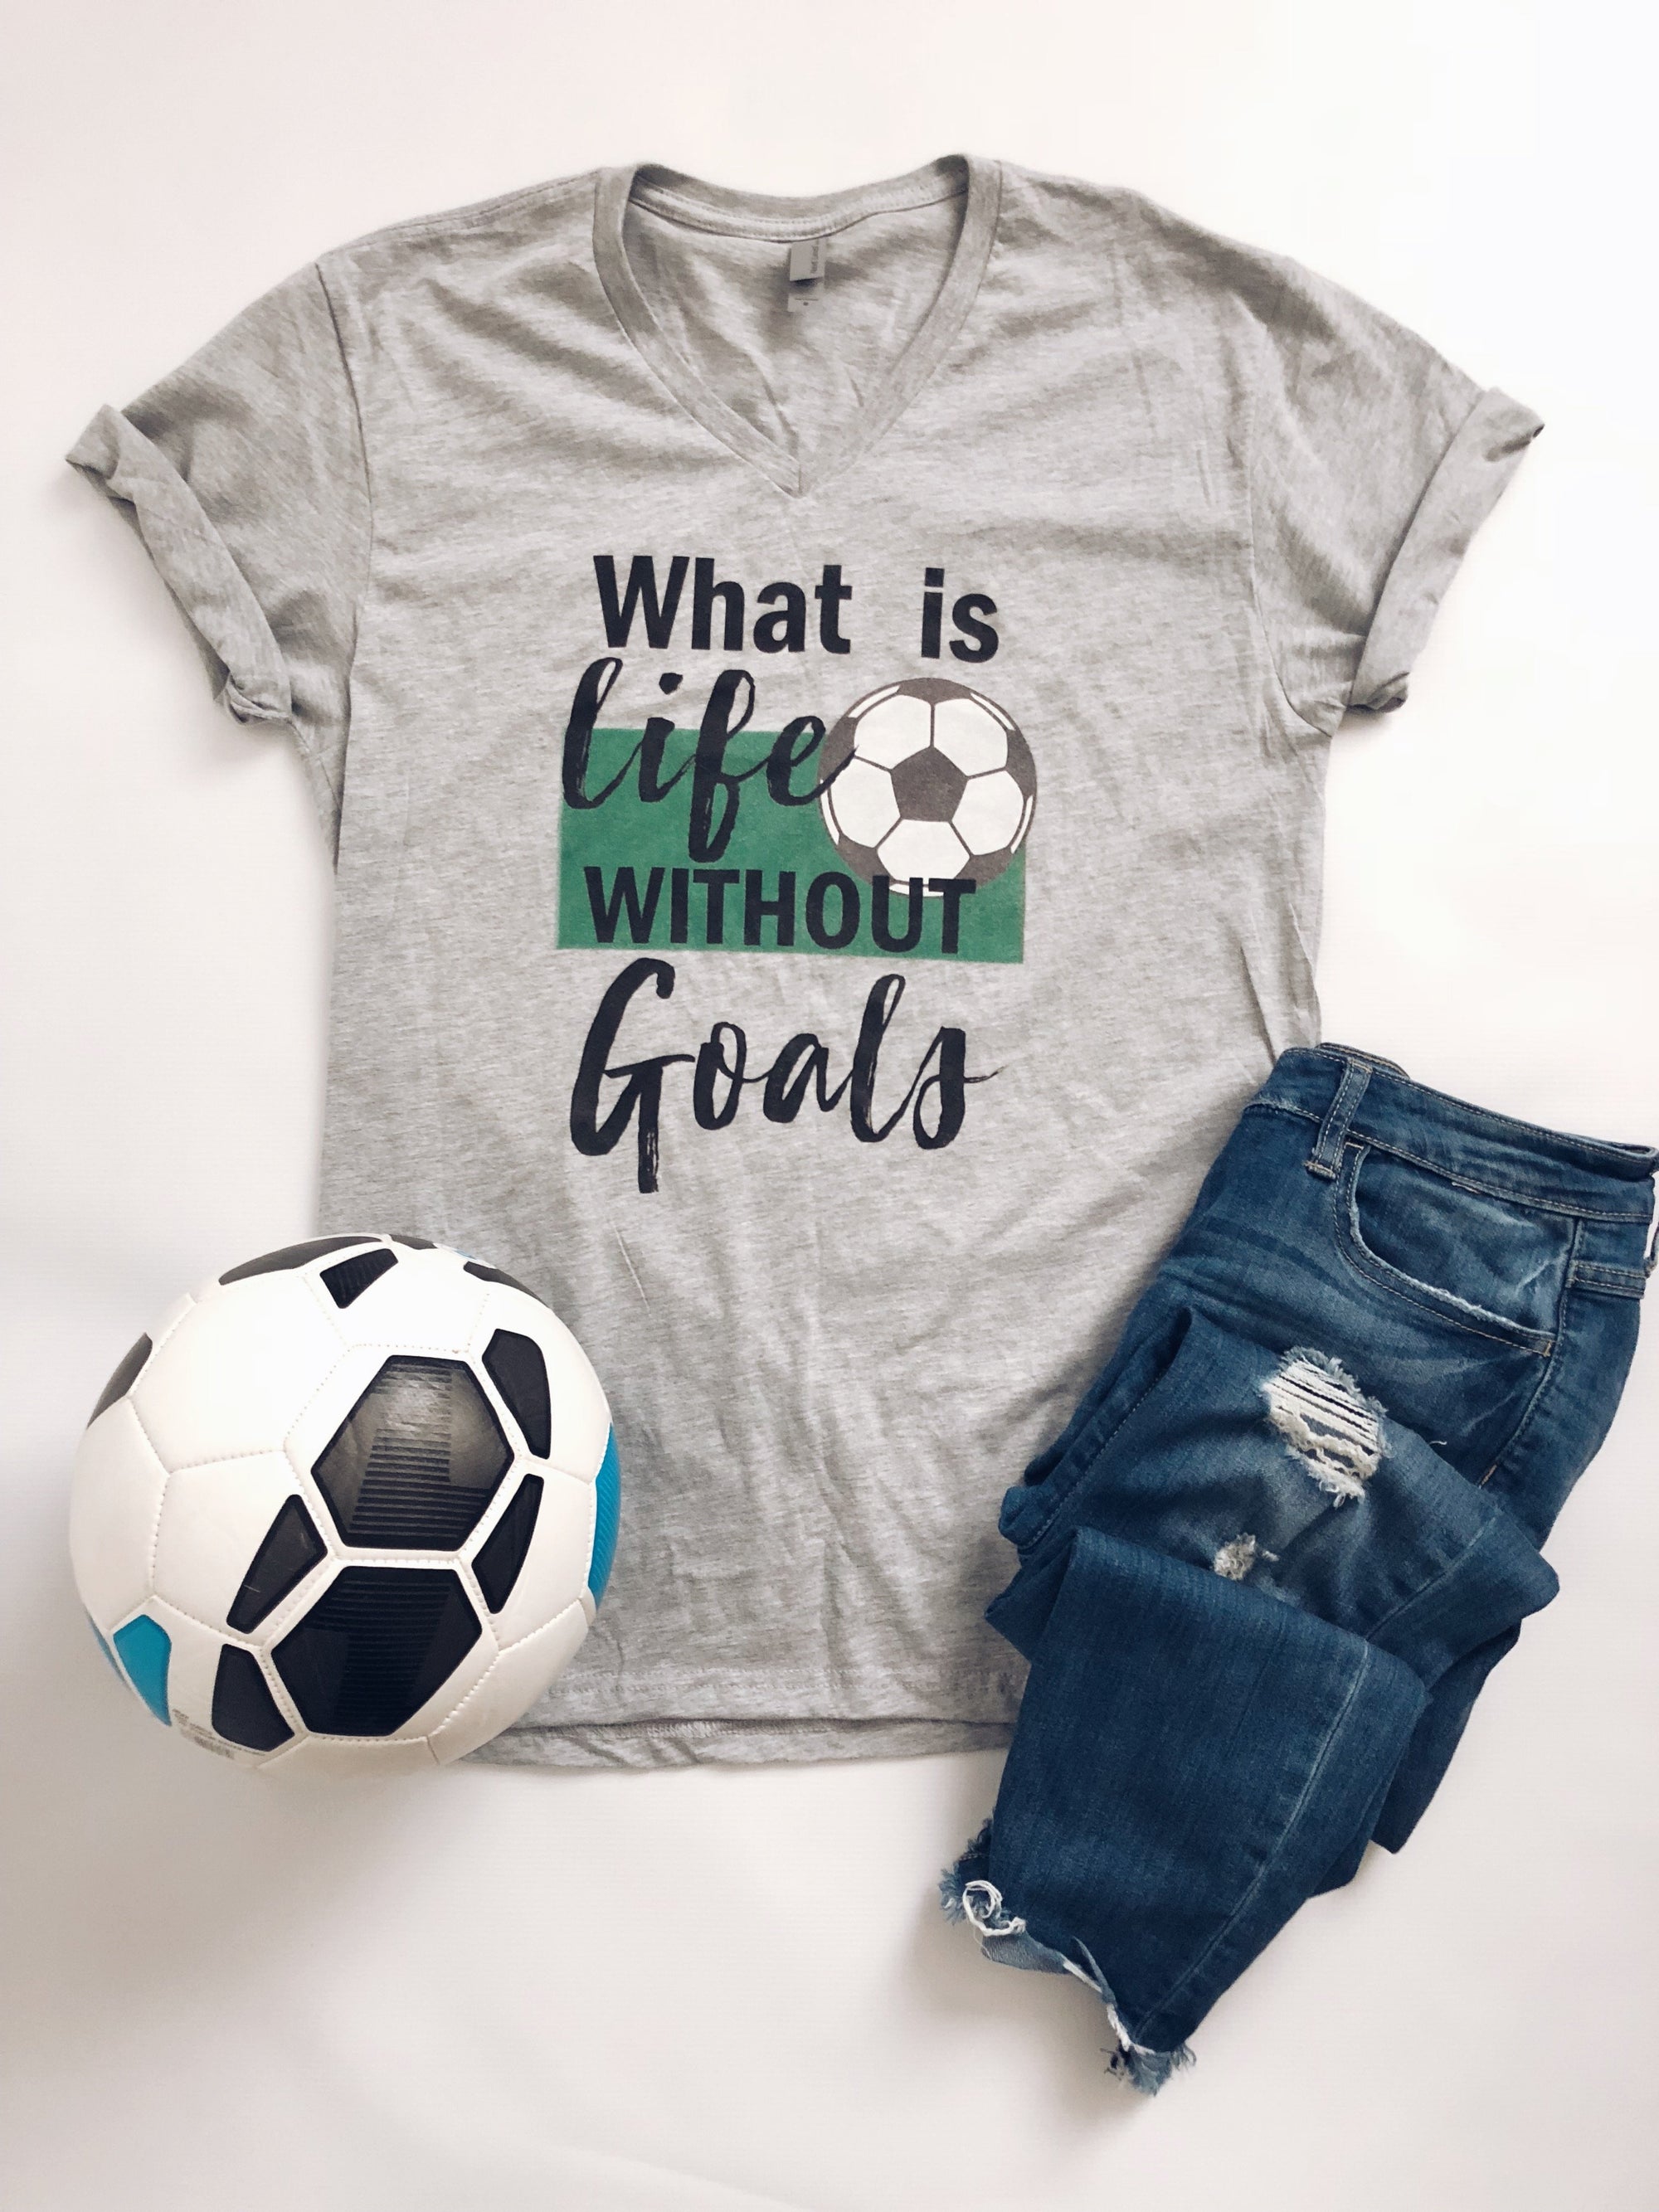 What is life without goals Short sleeve sports tee Next Level 6240 heather grey 